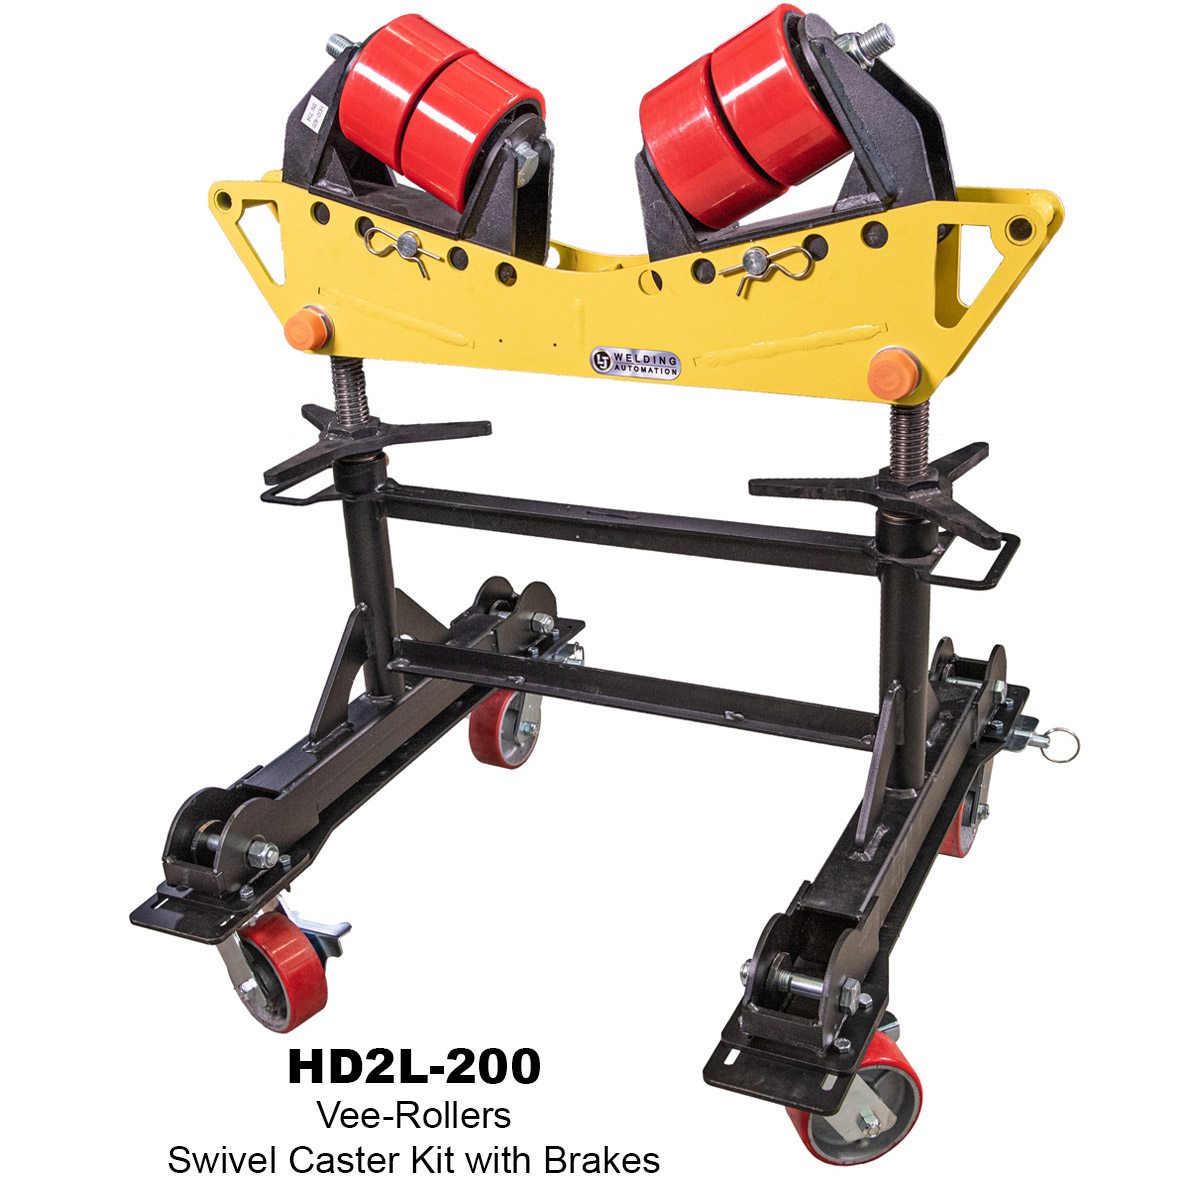 HD2L-200 pipe stand welding